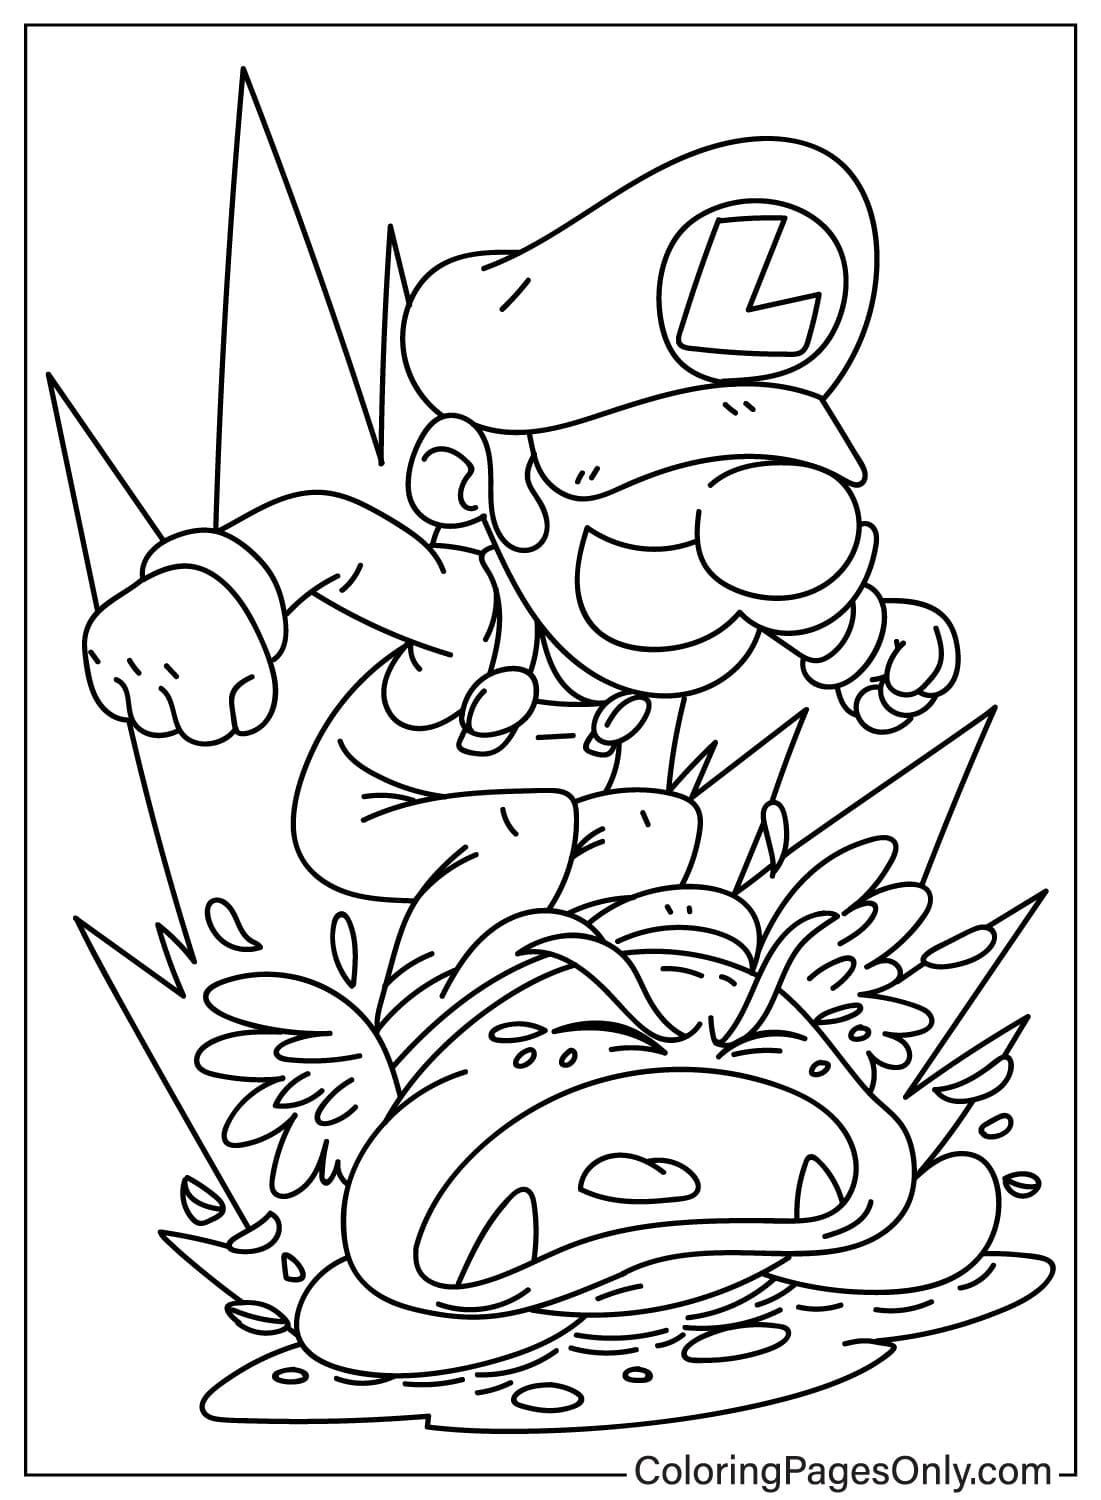 Luigi and Goomba Coloring Page